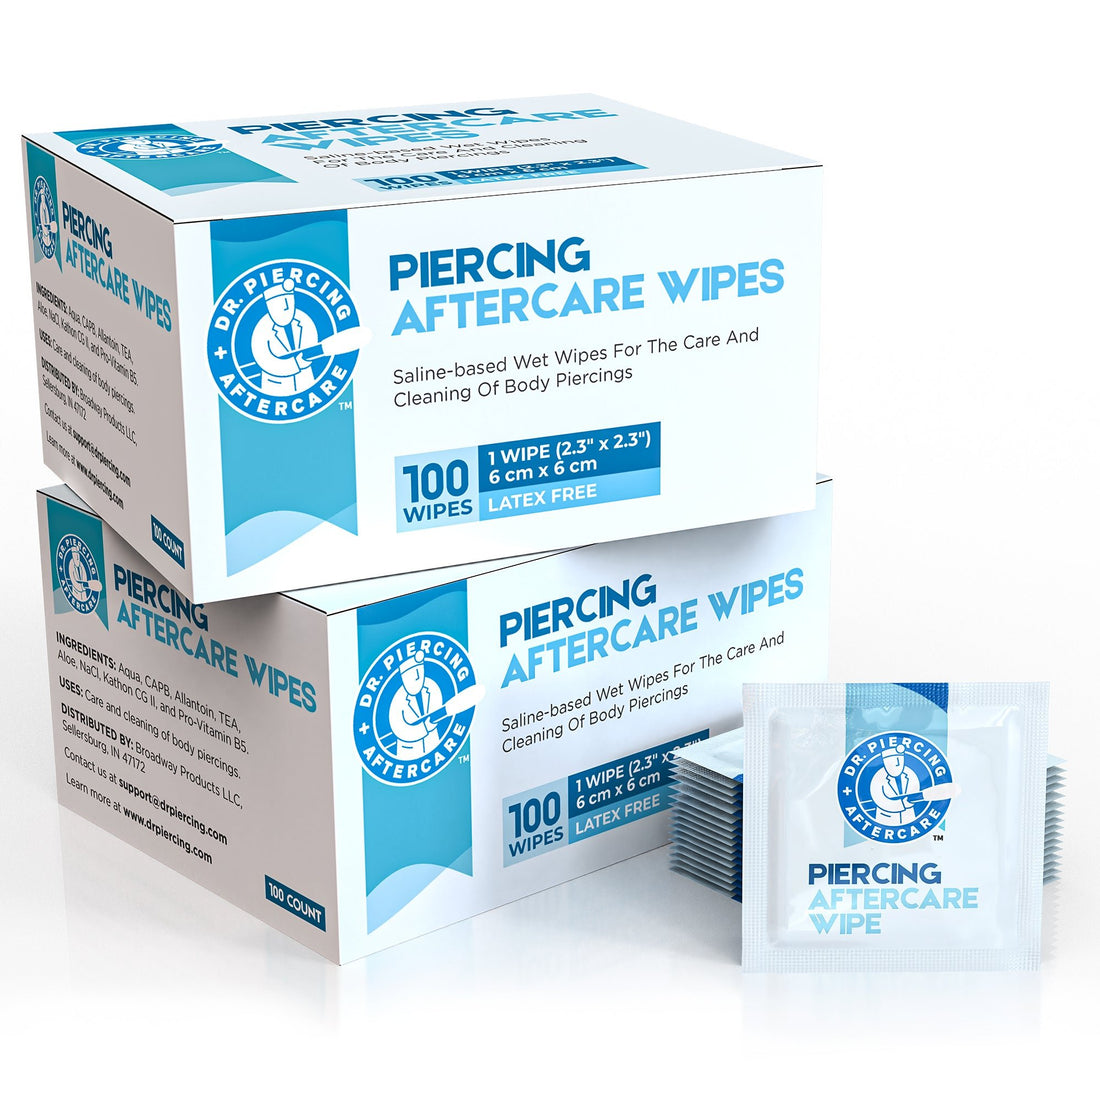 200 Wipes - Wound Treatments &amp; Skin Relief - Dr. Piercing Aftercare